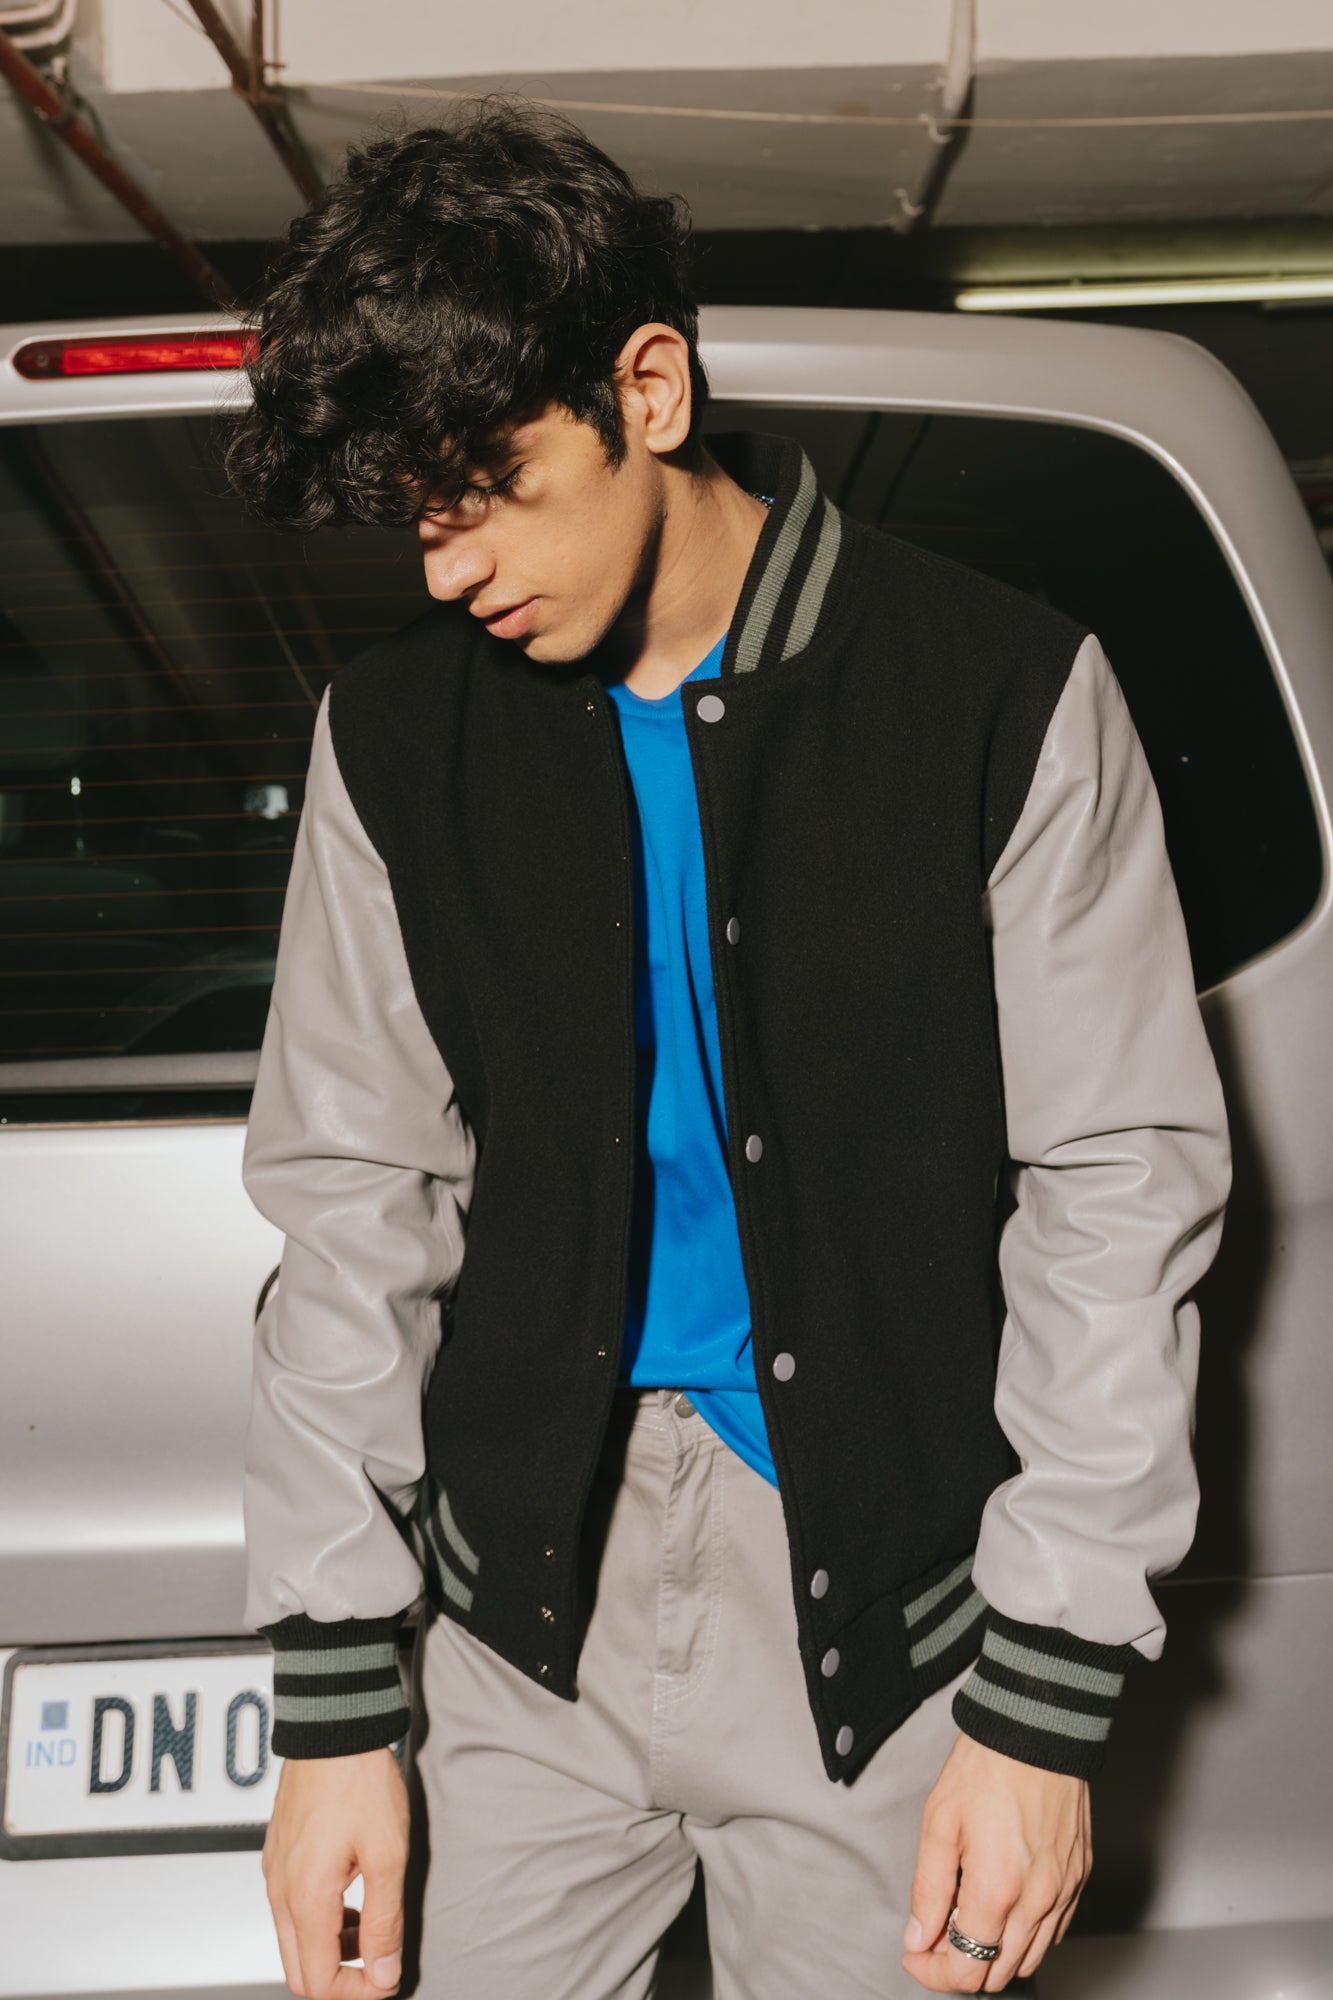 15 Best Varsity Jackets to Shop Now